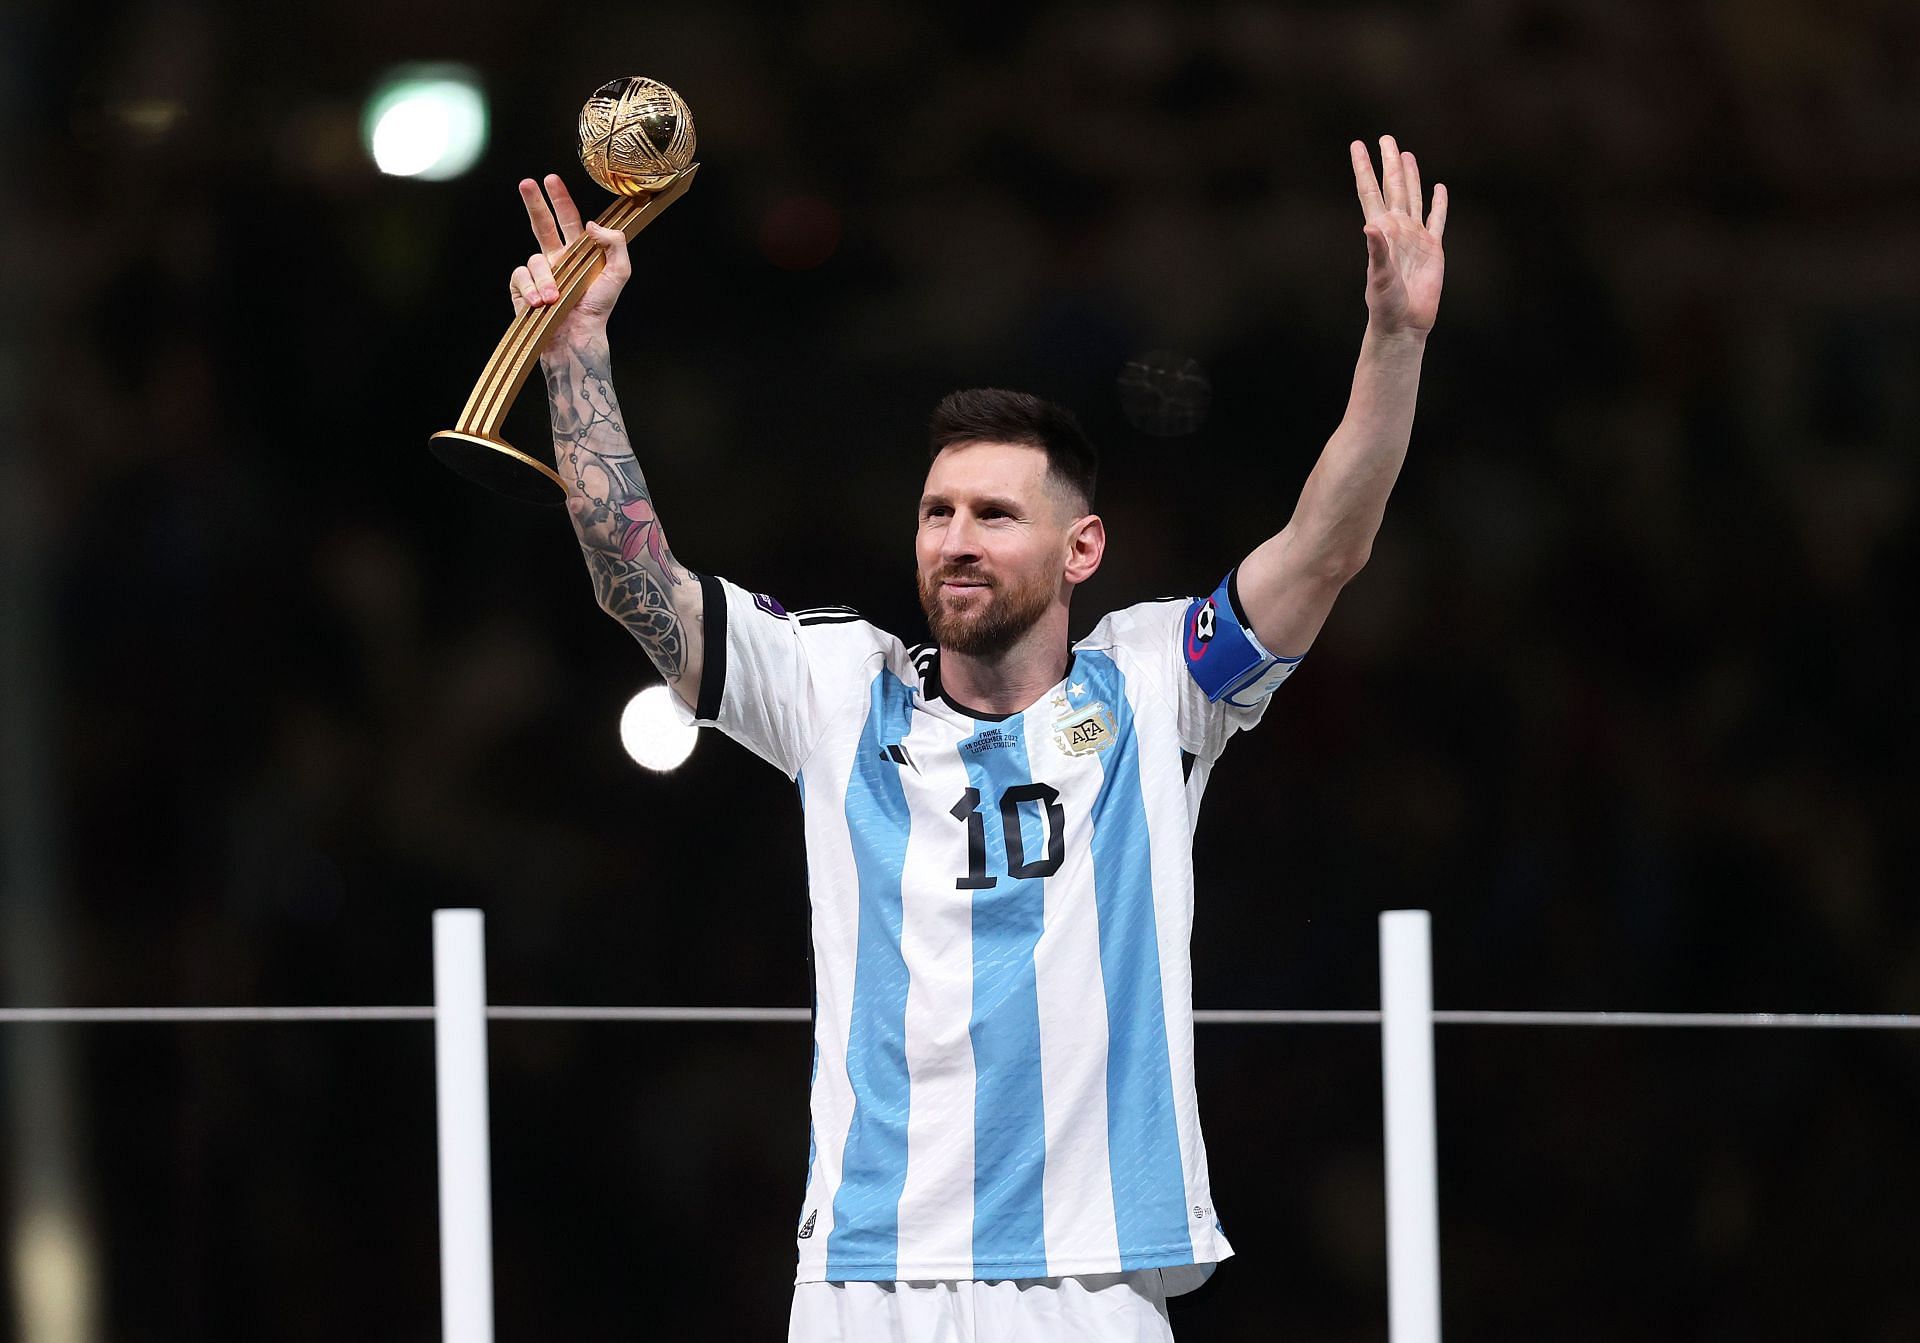 Lionel Messi with the Golden Ball Award at the 2022 FIFA World Cup in Qatar.